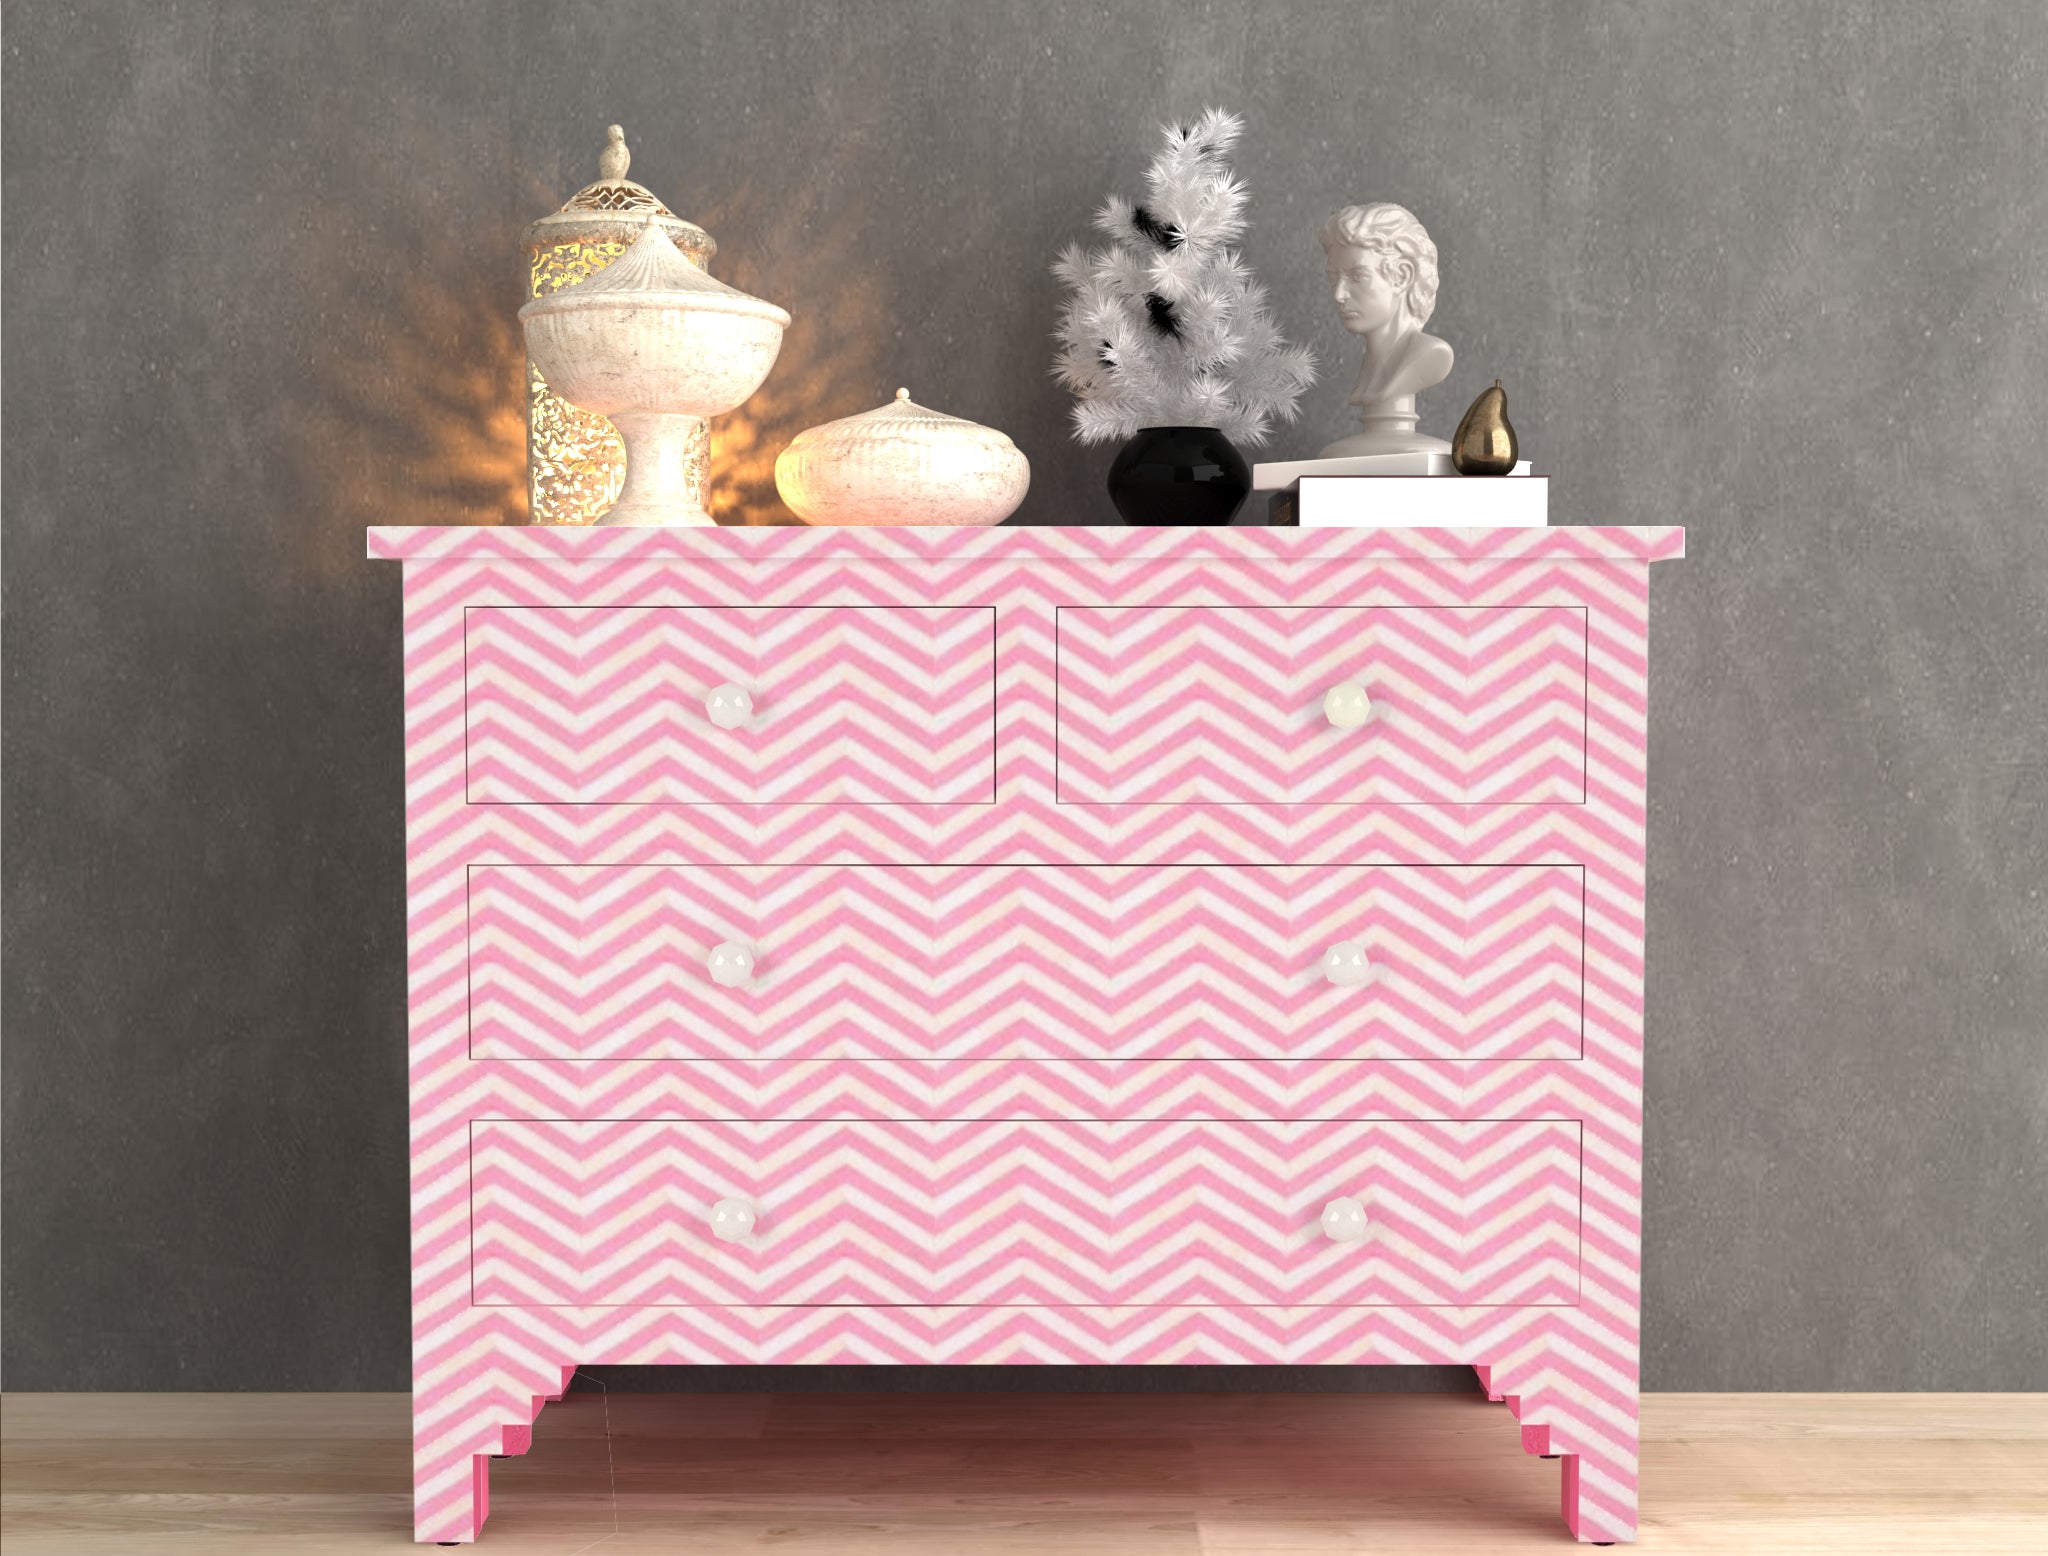 Isra Chest of Drawers - Pink Bone Inlay - Tabeer Homes